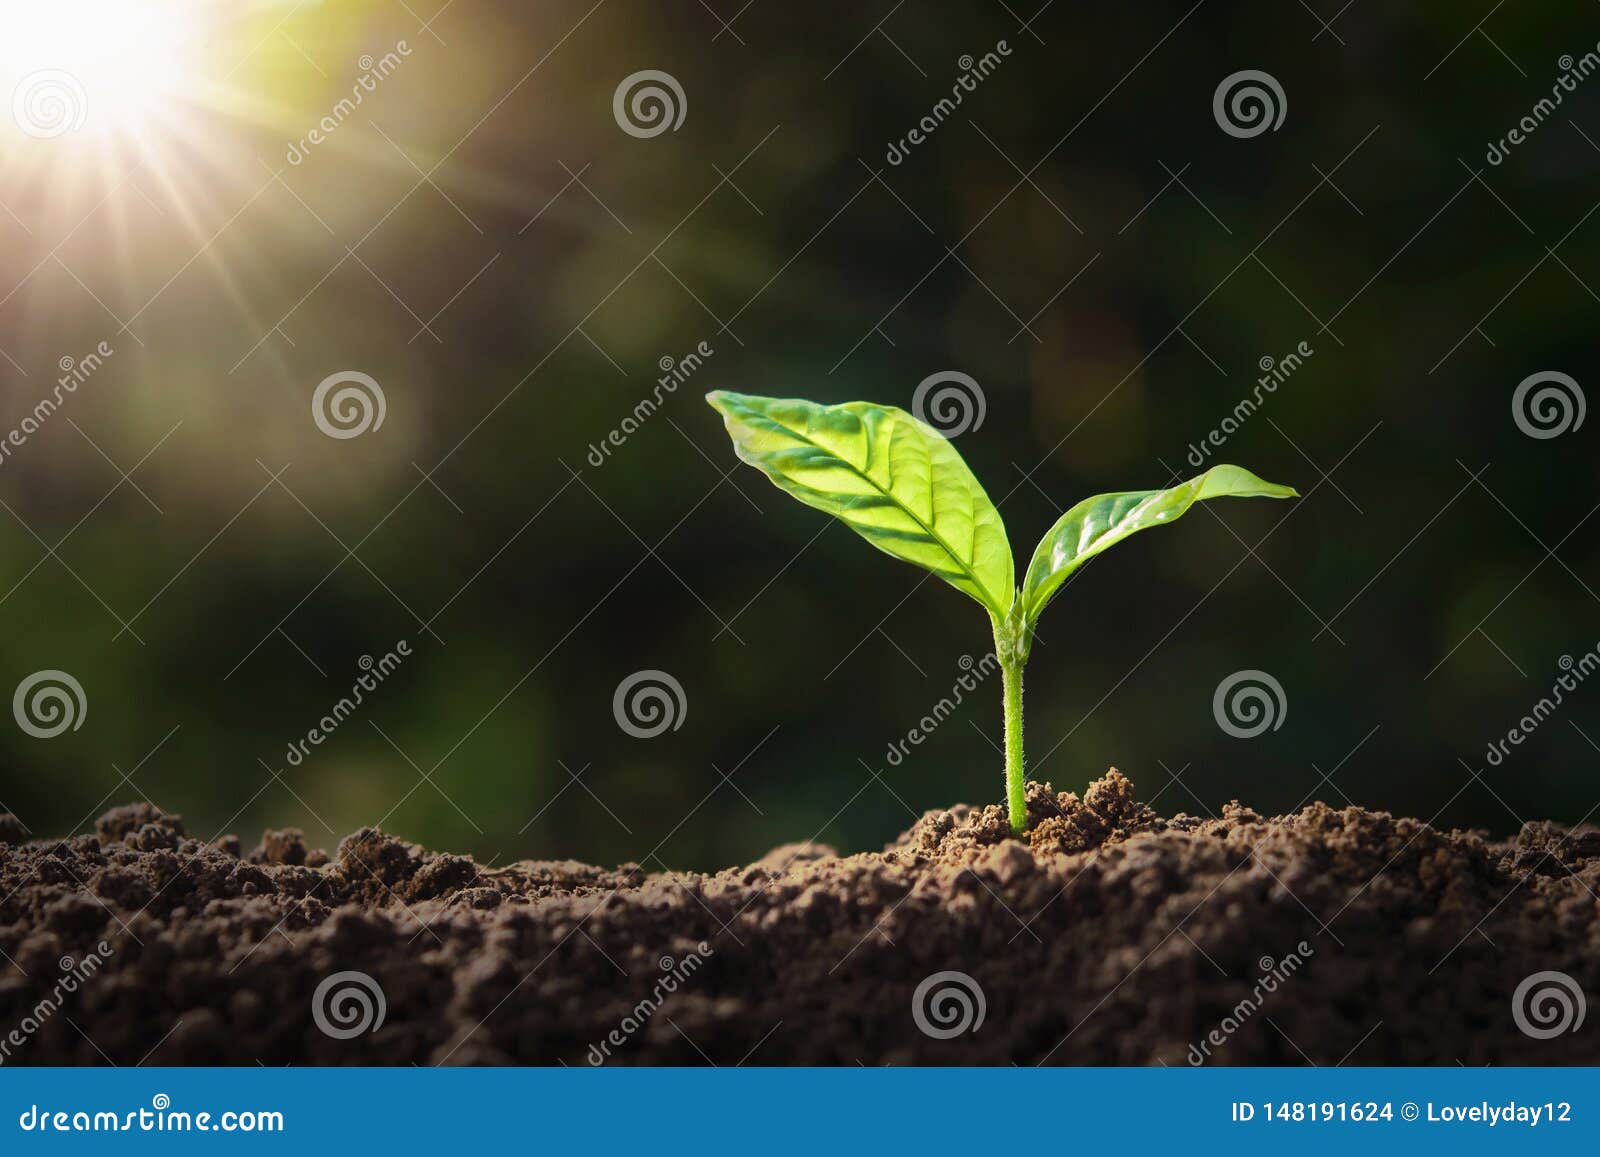 plant growing on soil with sunshine. eco earth day concept